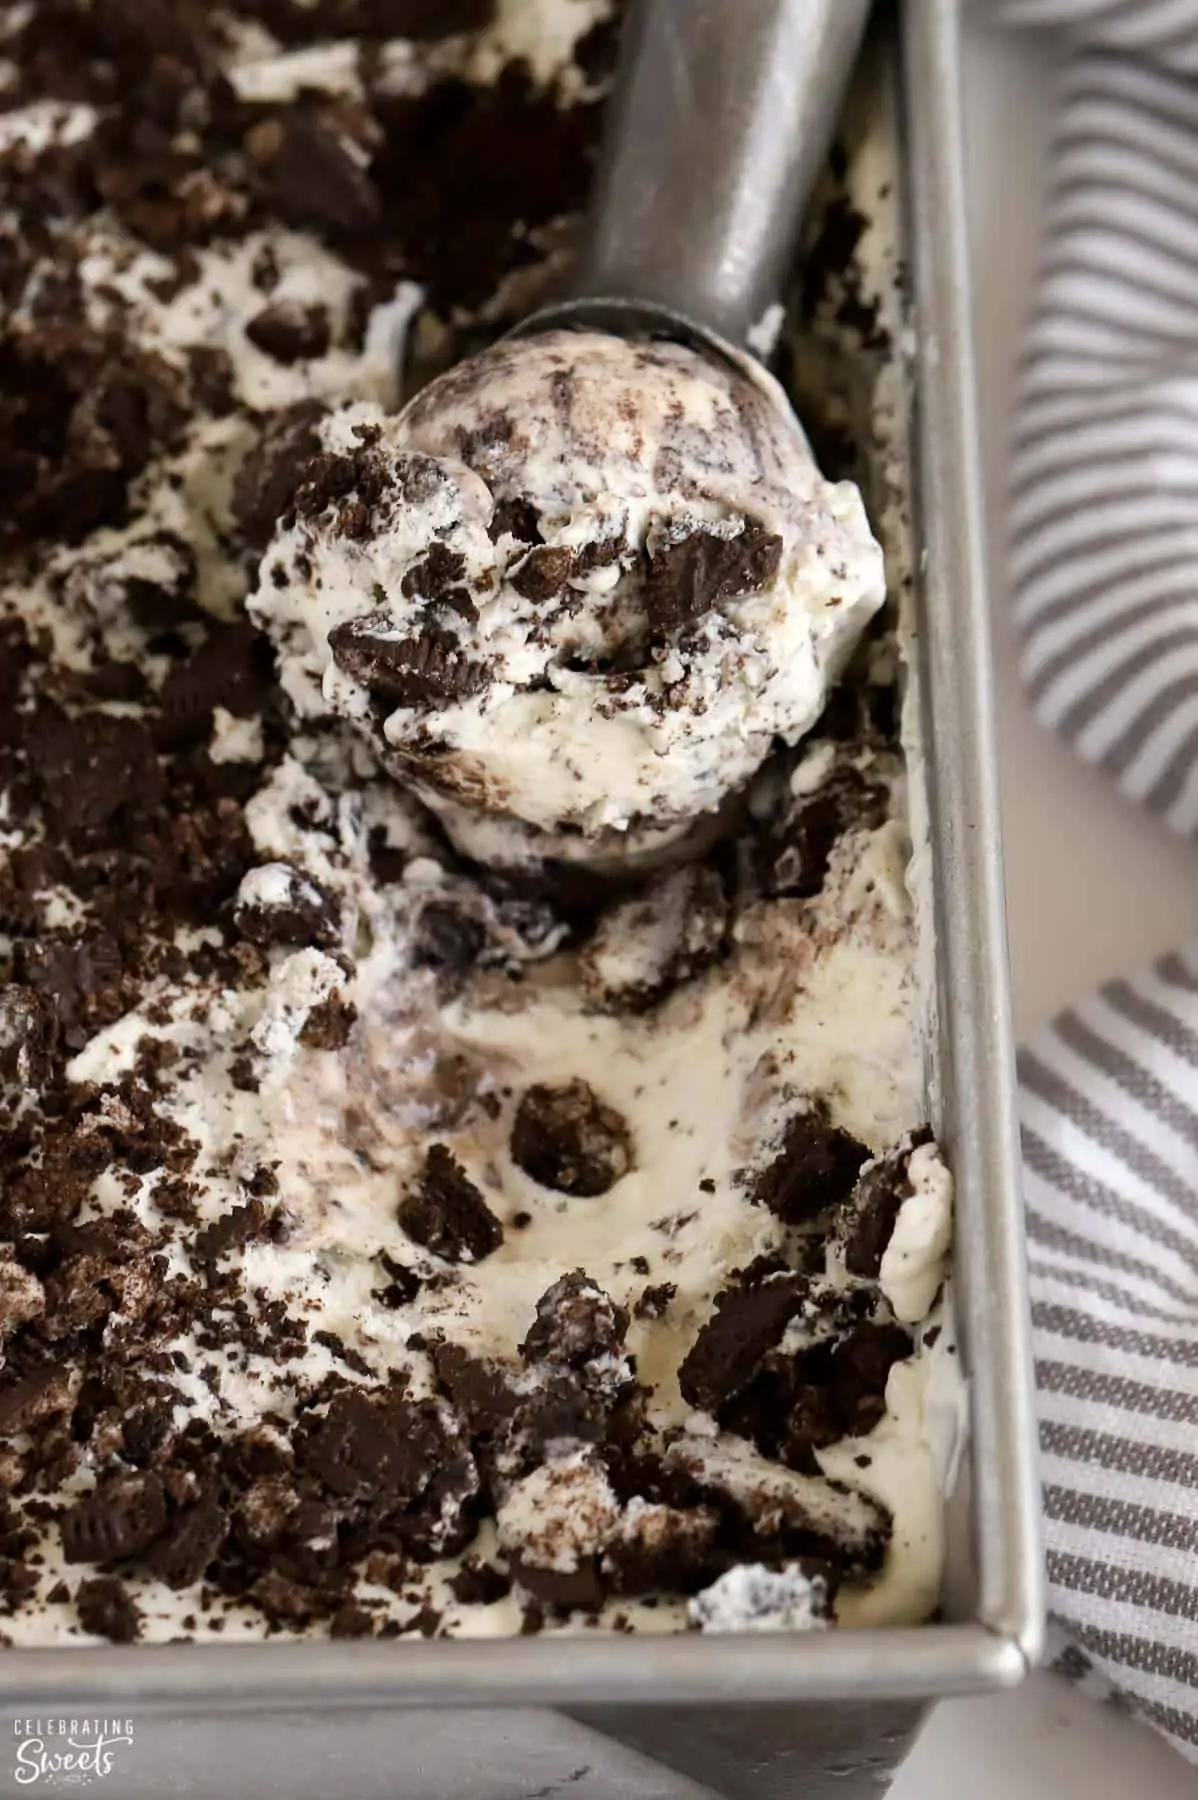 Cookies and cream ice cream in a loaf pan with a silver ice cream scoop.